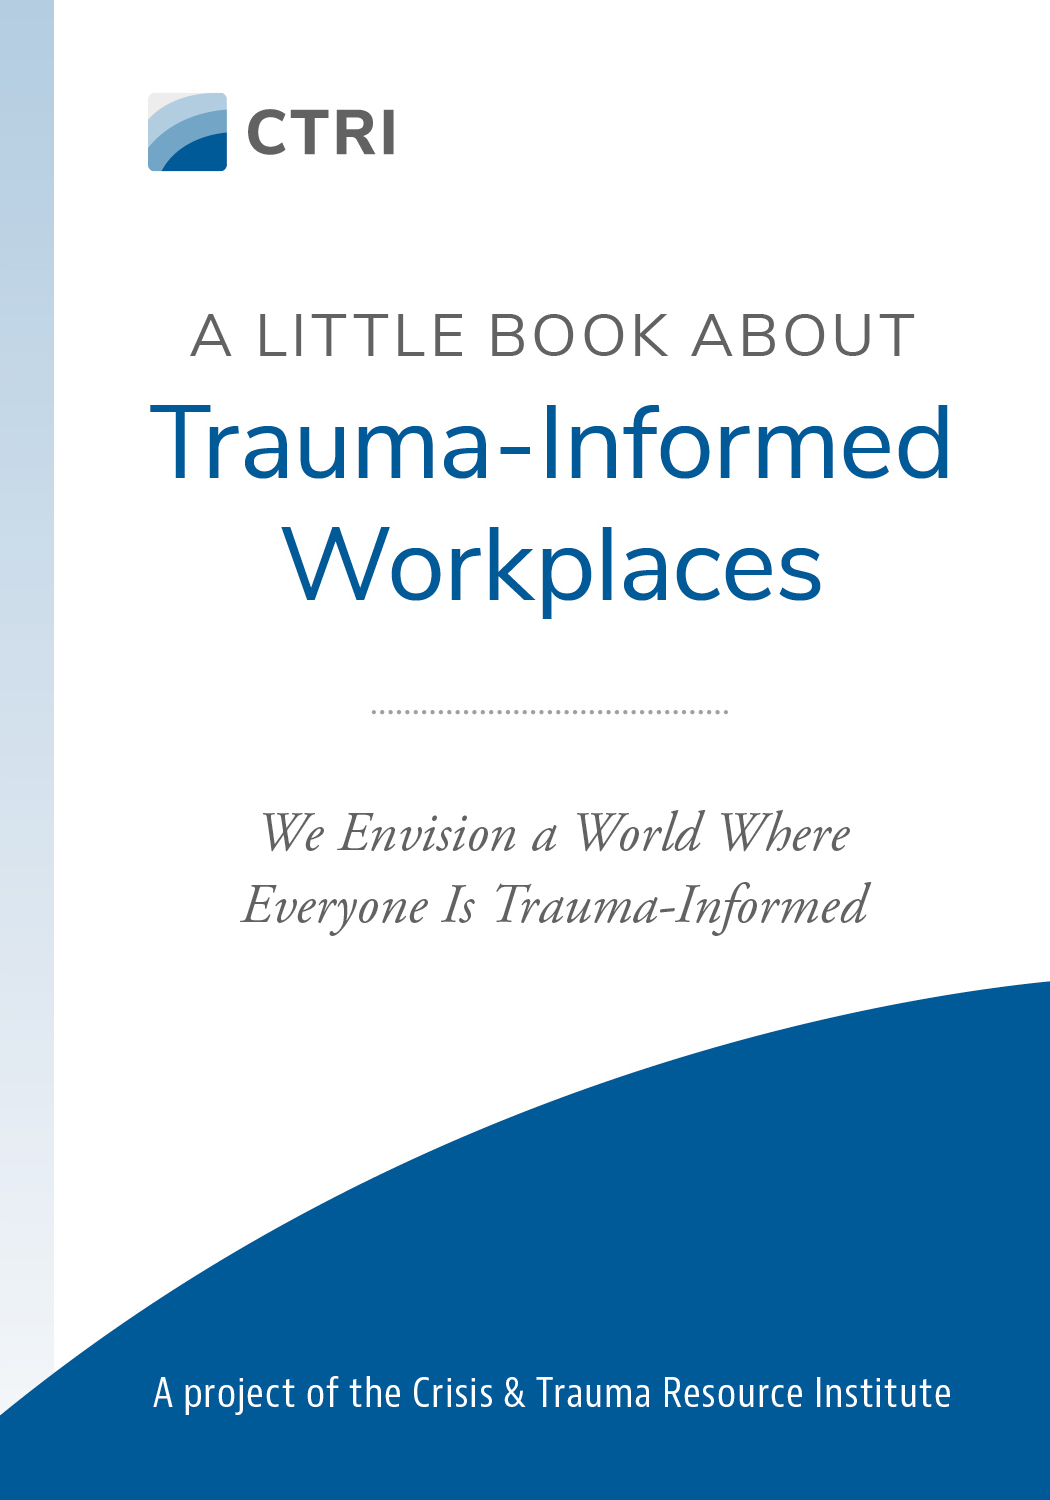 A Little Book About Trauma-Informed Workplaces book cover image